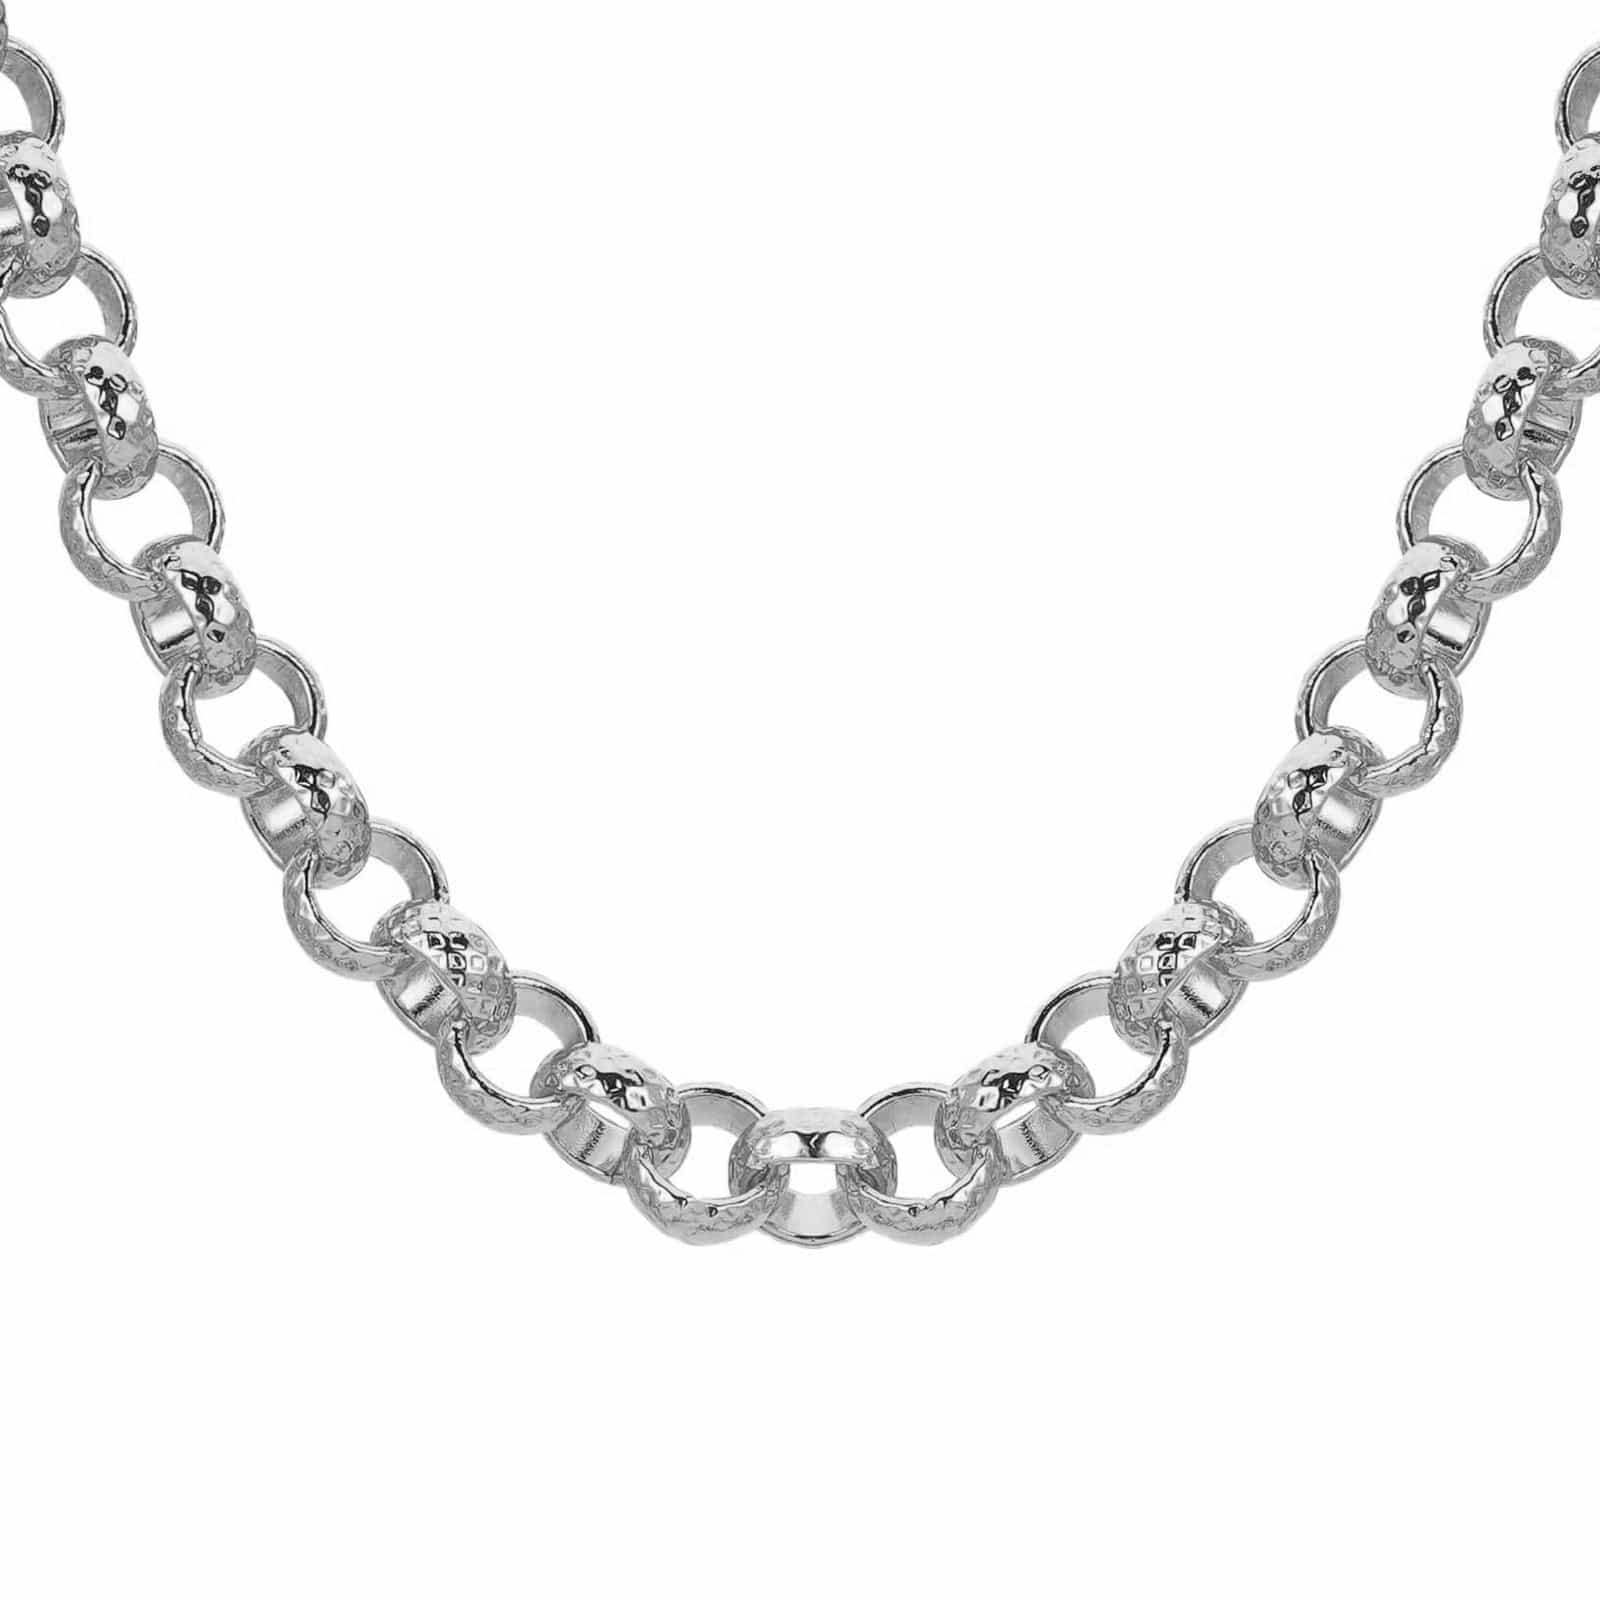 White Gold Dipped Chains Patterned Belcher Chain 12mm - White Gold